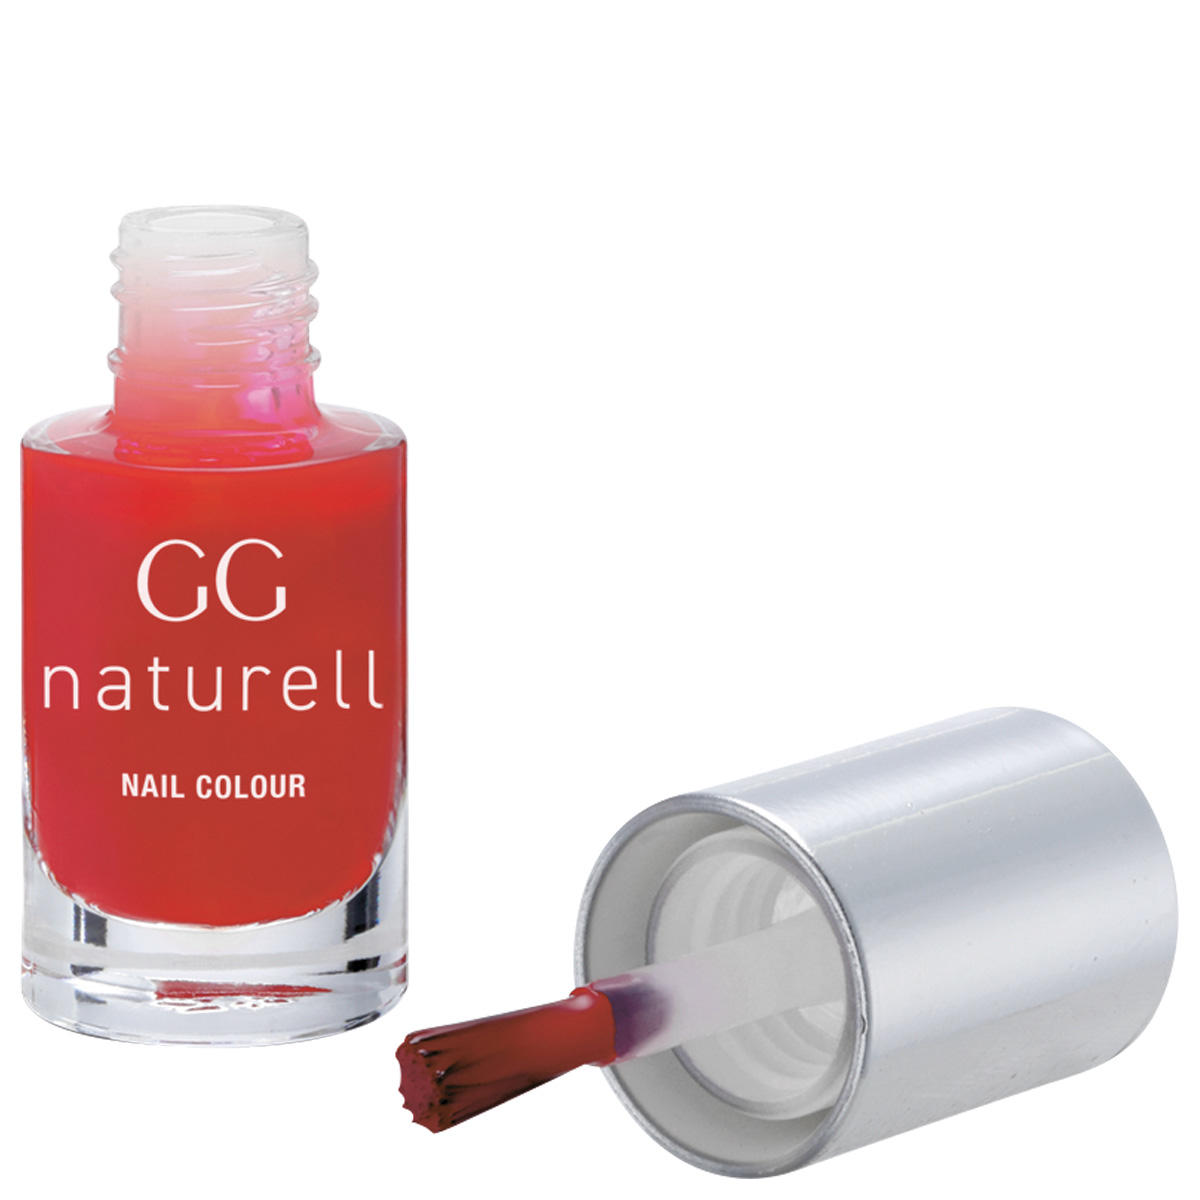 GERTRAUD GRUBER GG naturell Nail Colour 70 Mohnblüte 5 ml